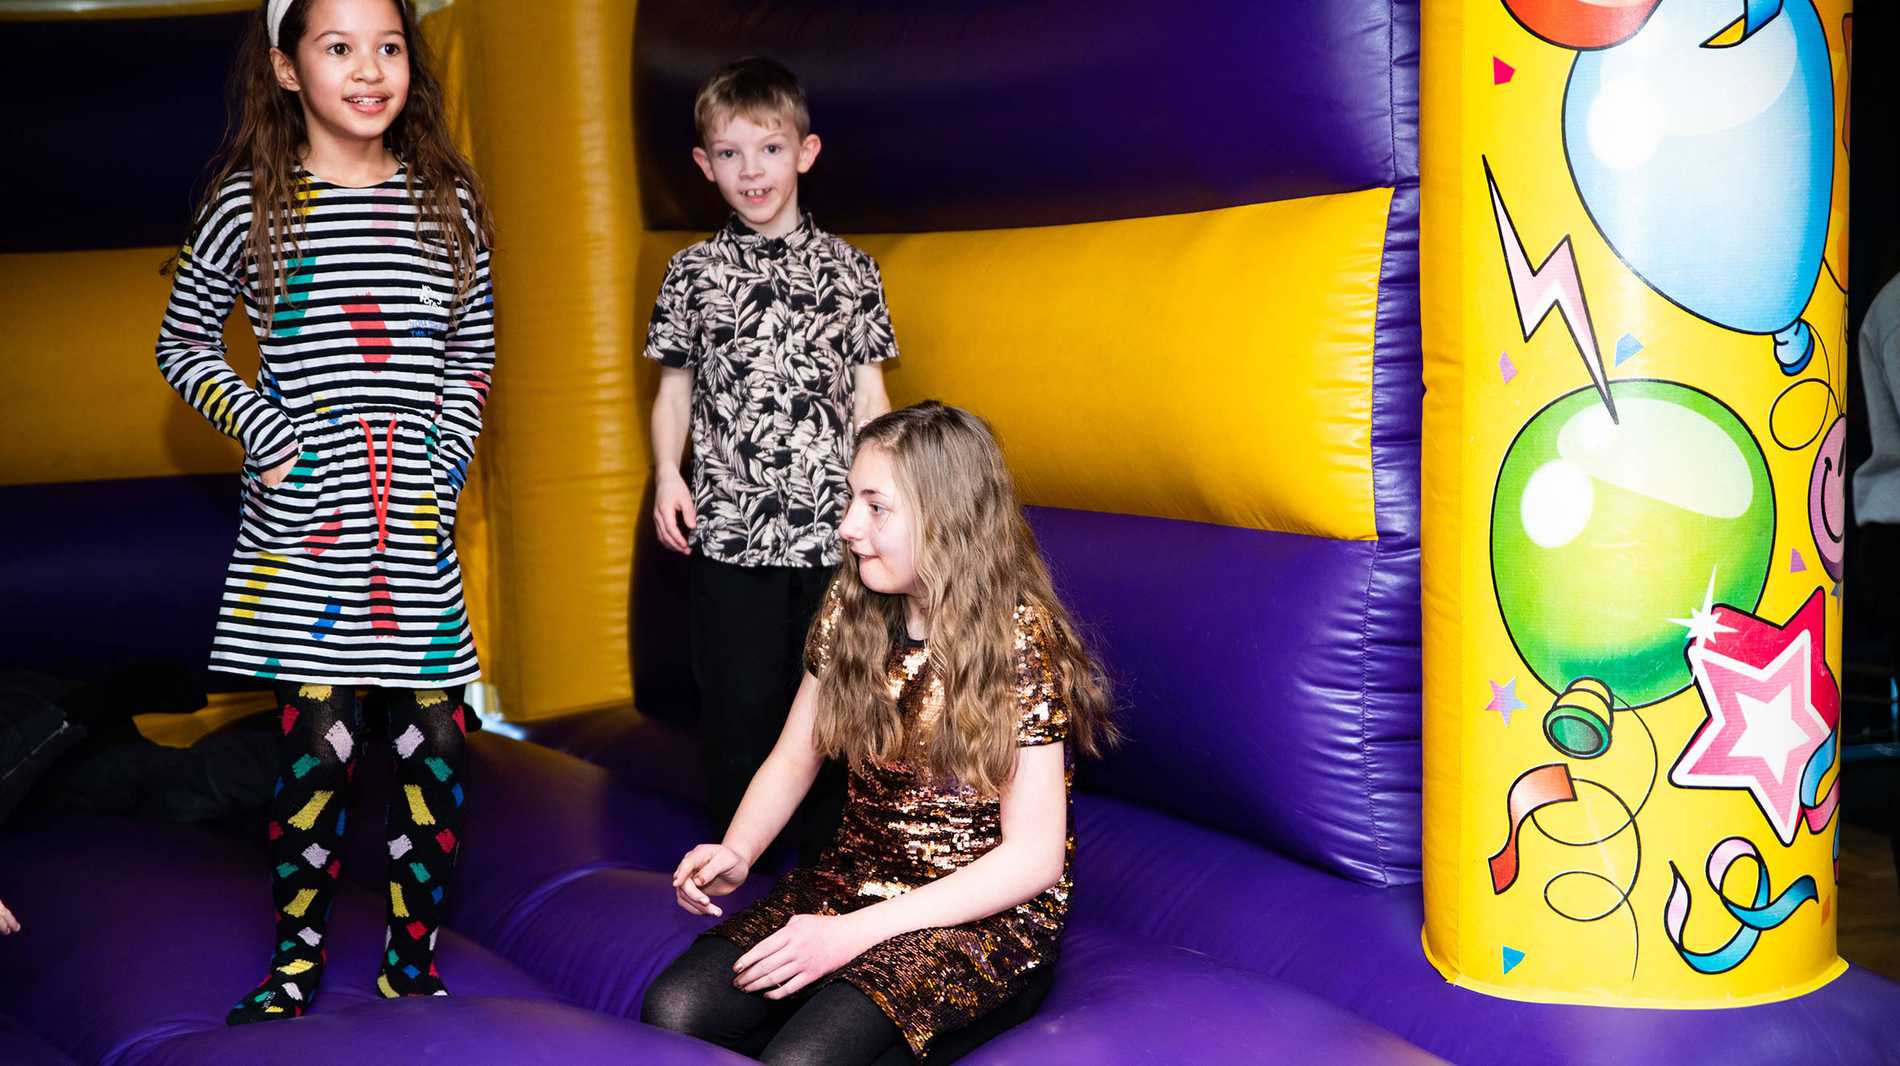 Eloise and her friends playing on the bouncy castle.